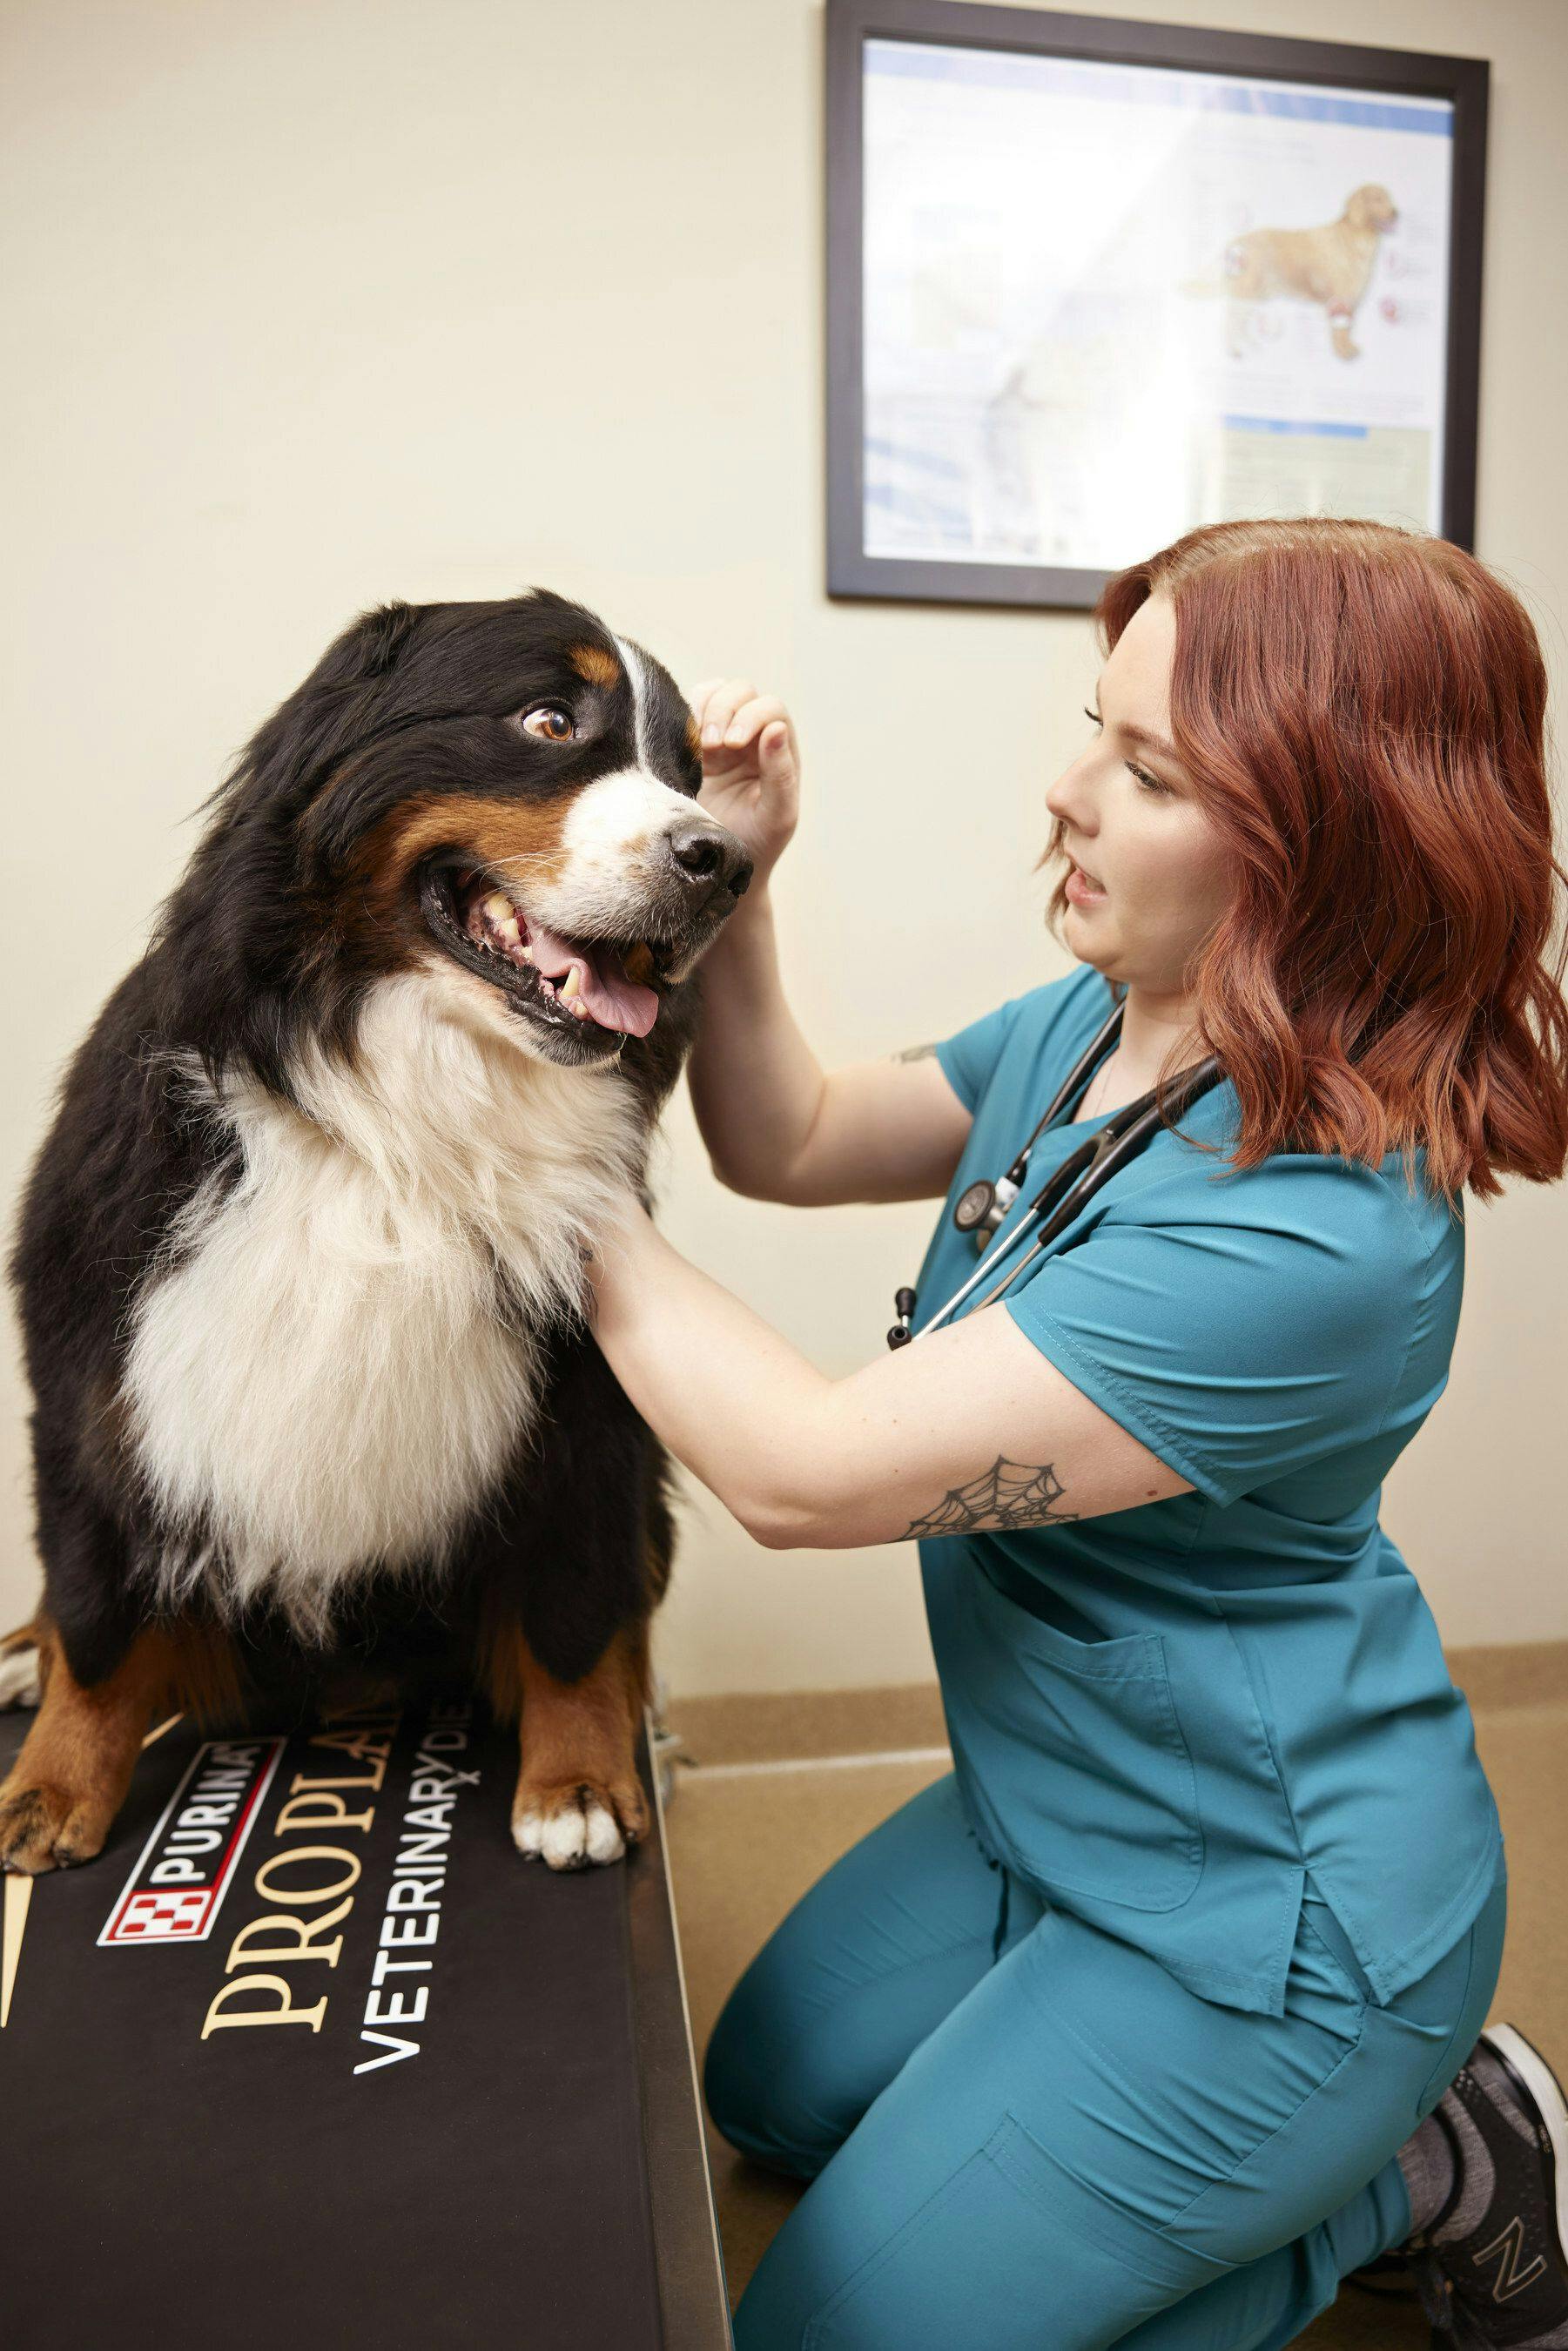 Survey results show the current state of the veterinary profession